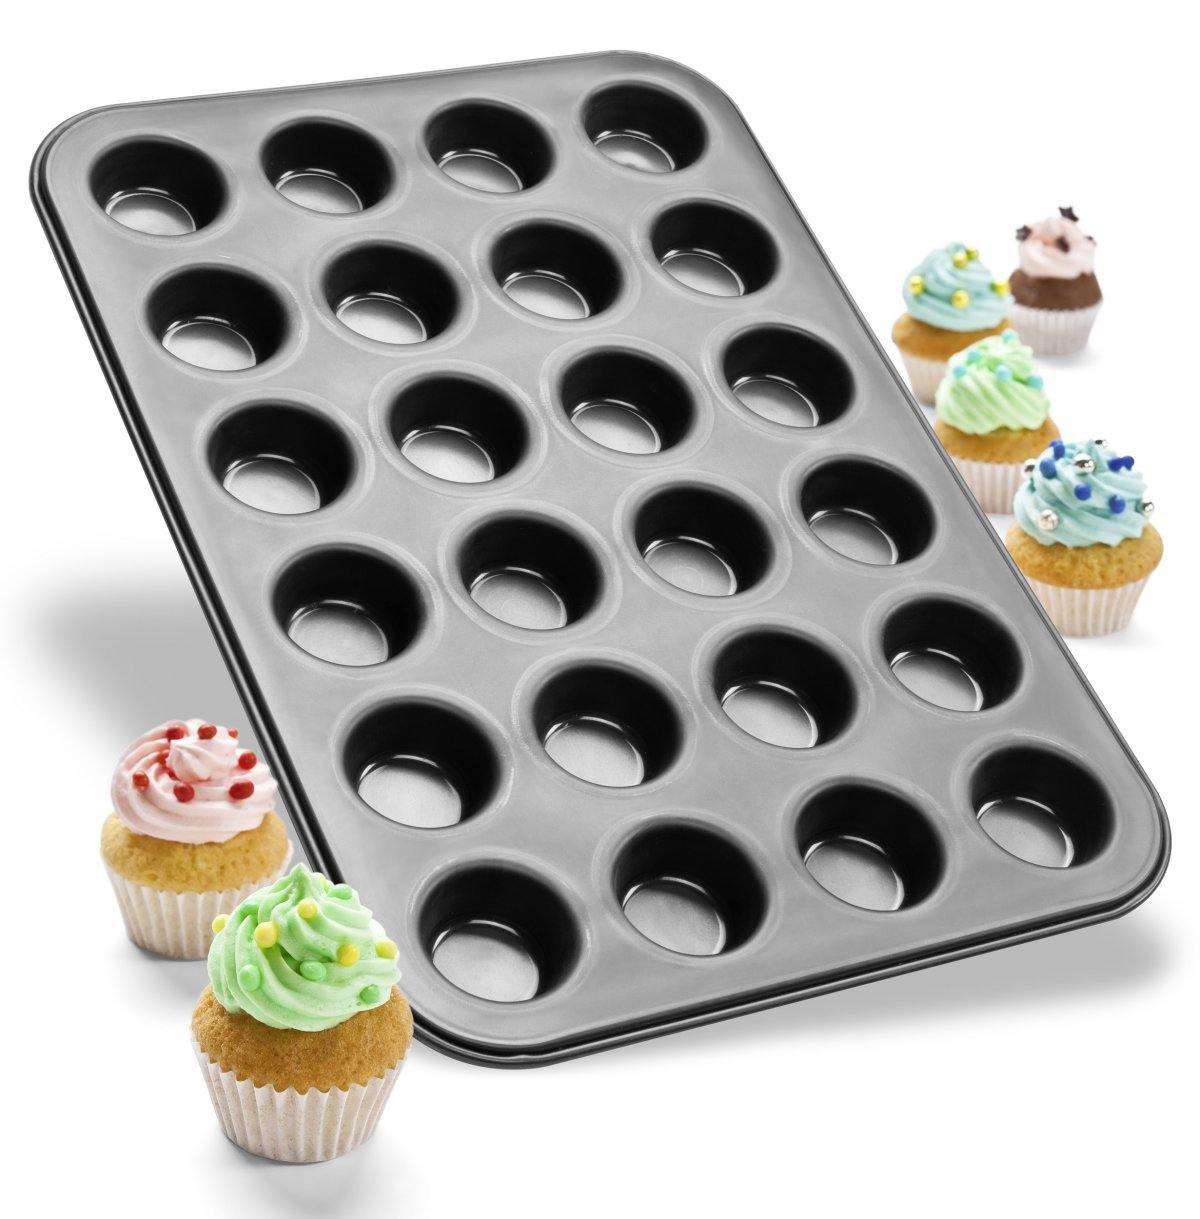 Zenker  "Black/Metallic" Mini-Muffin Tin For 24 Muffins, 38.5X26.5X2 cm - Whole and All